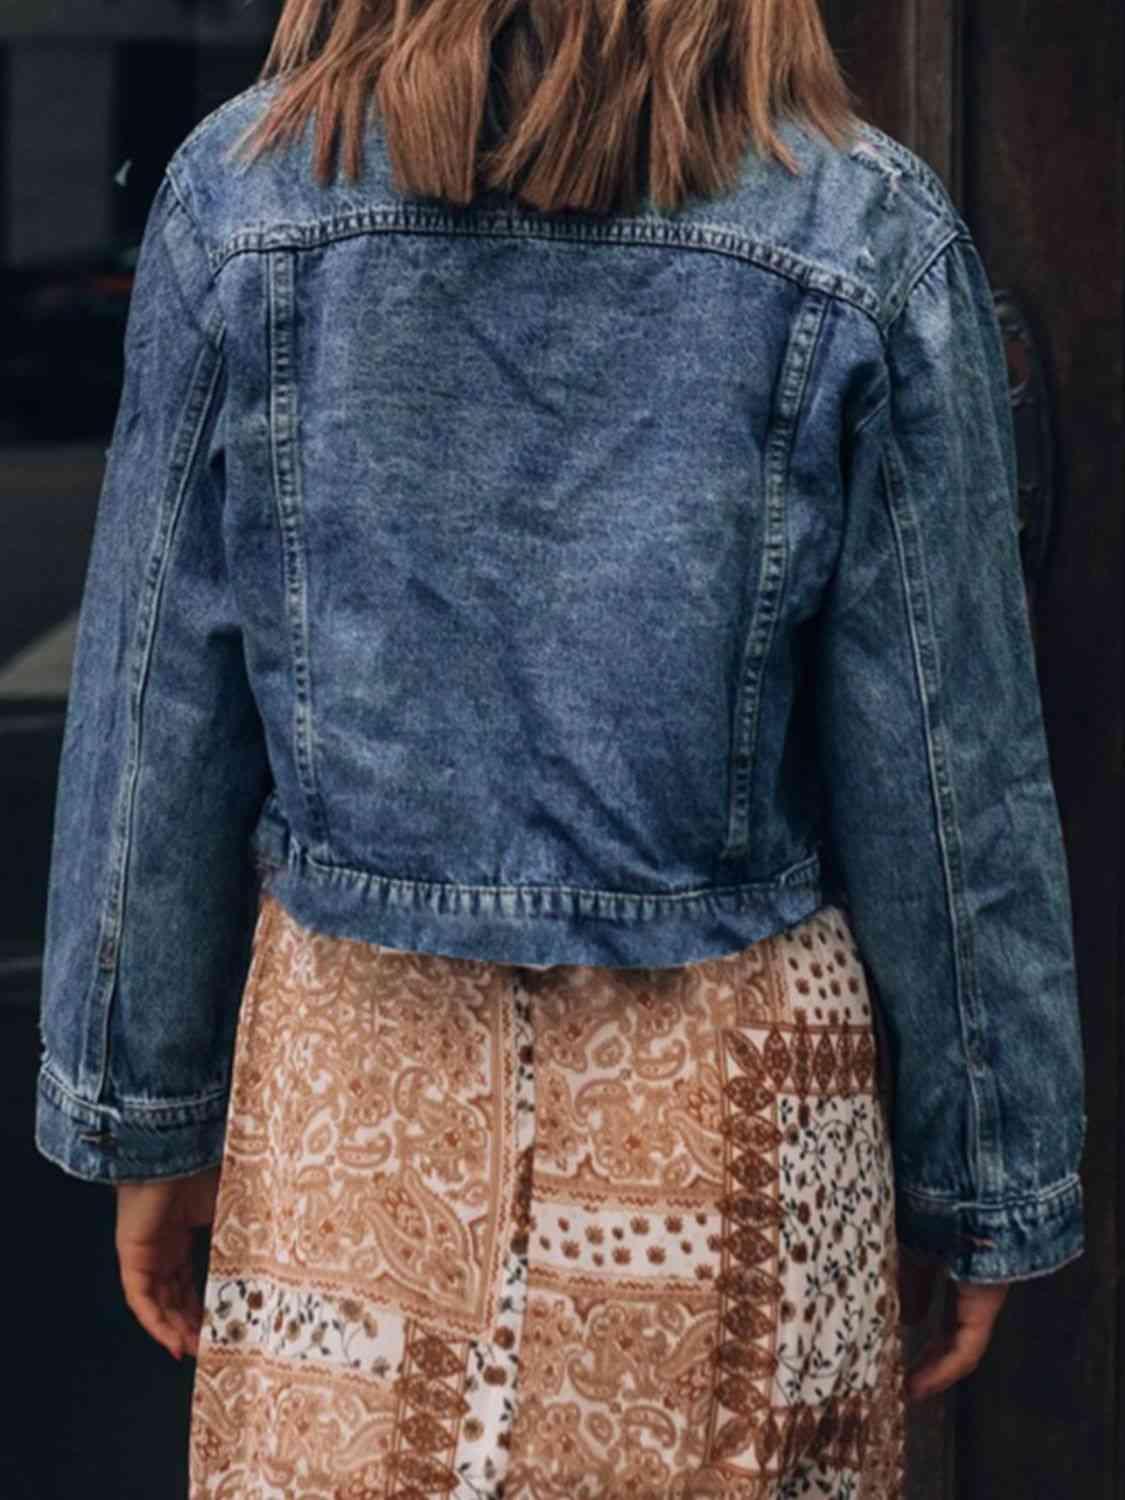 a woman wearing a denim jacket and a skirt